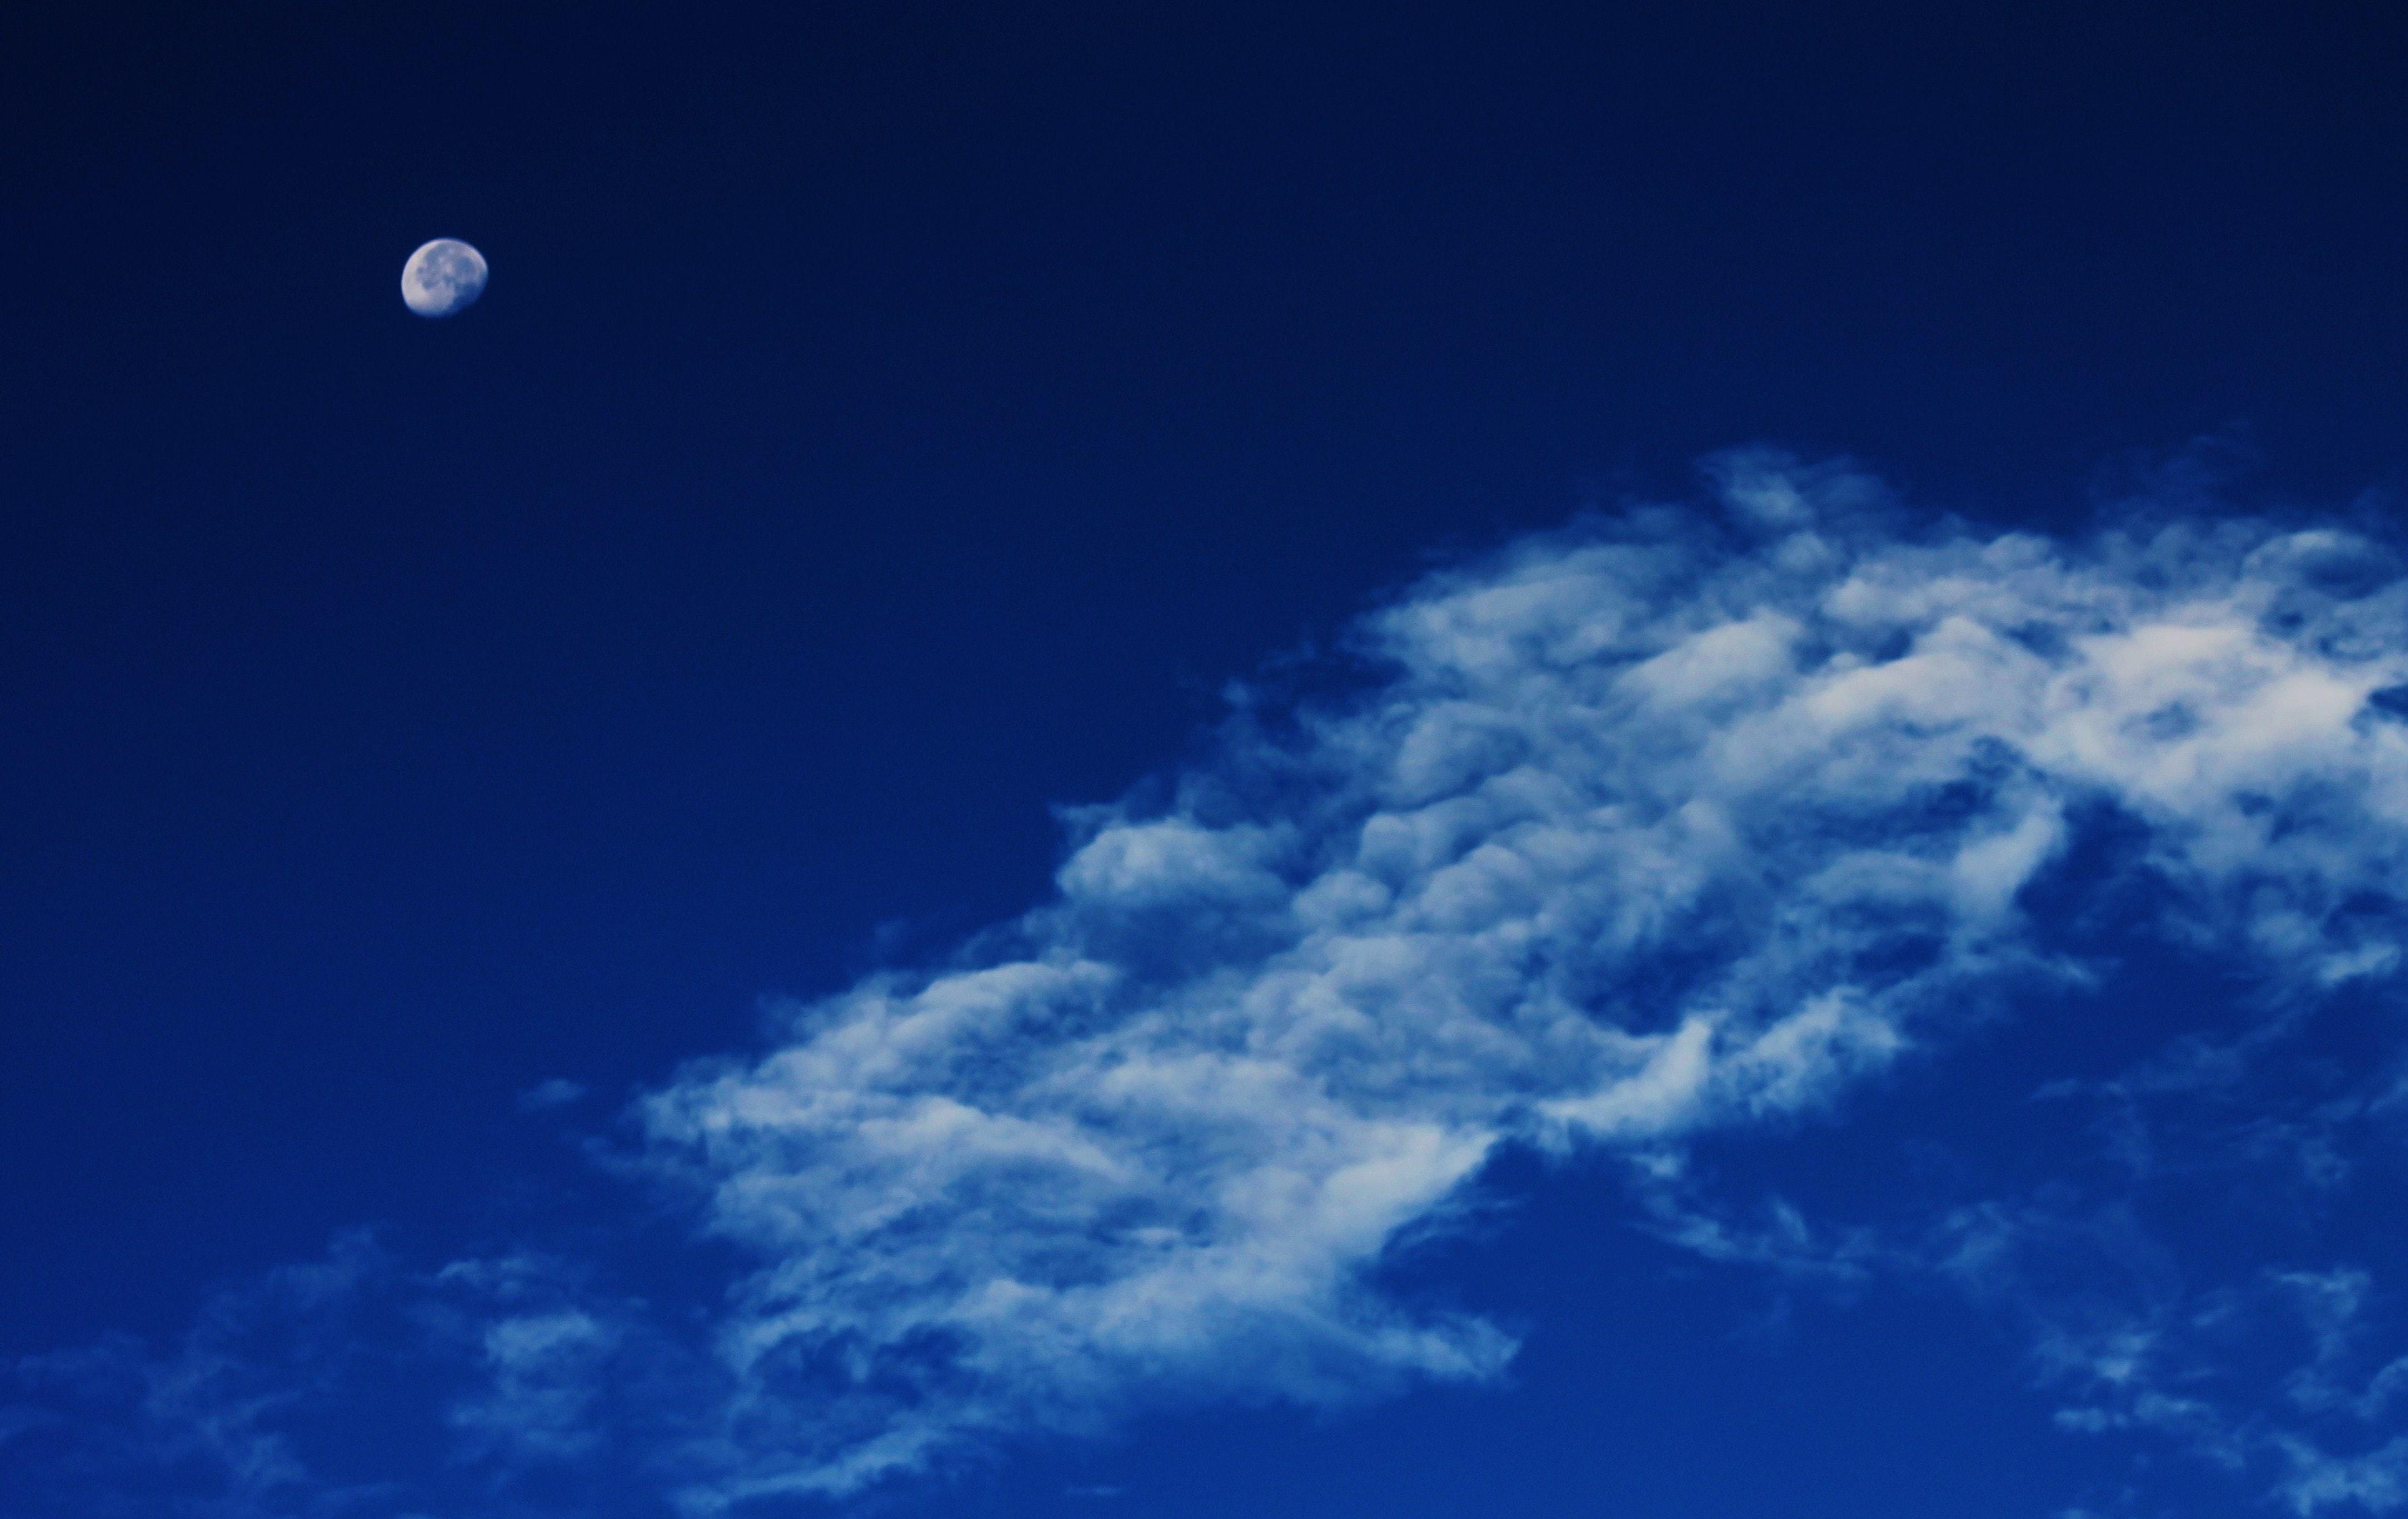 White Clouds Under Blue Sky With Gibbous Moon · Free